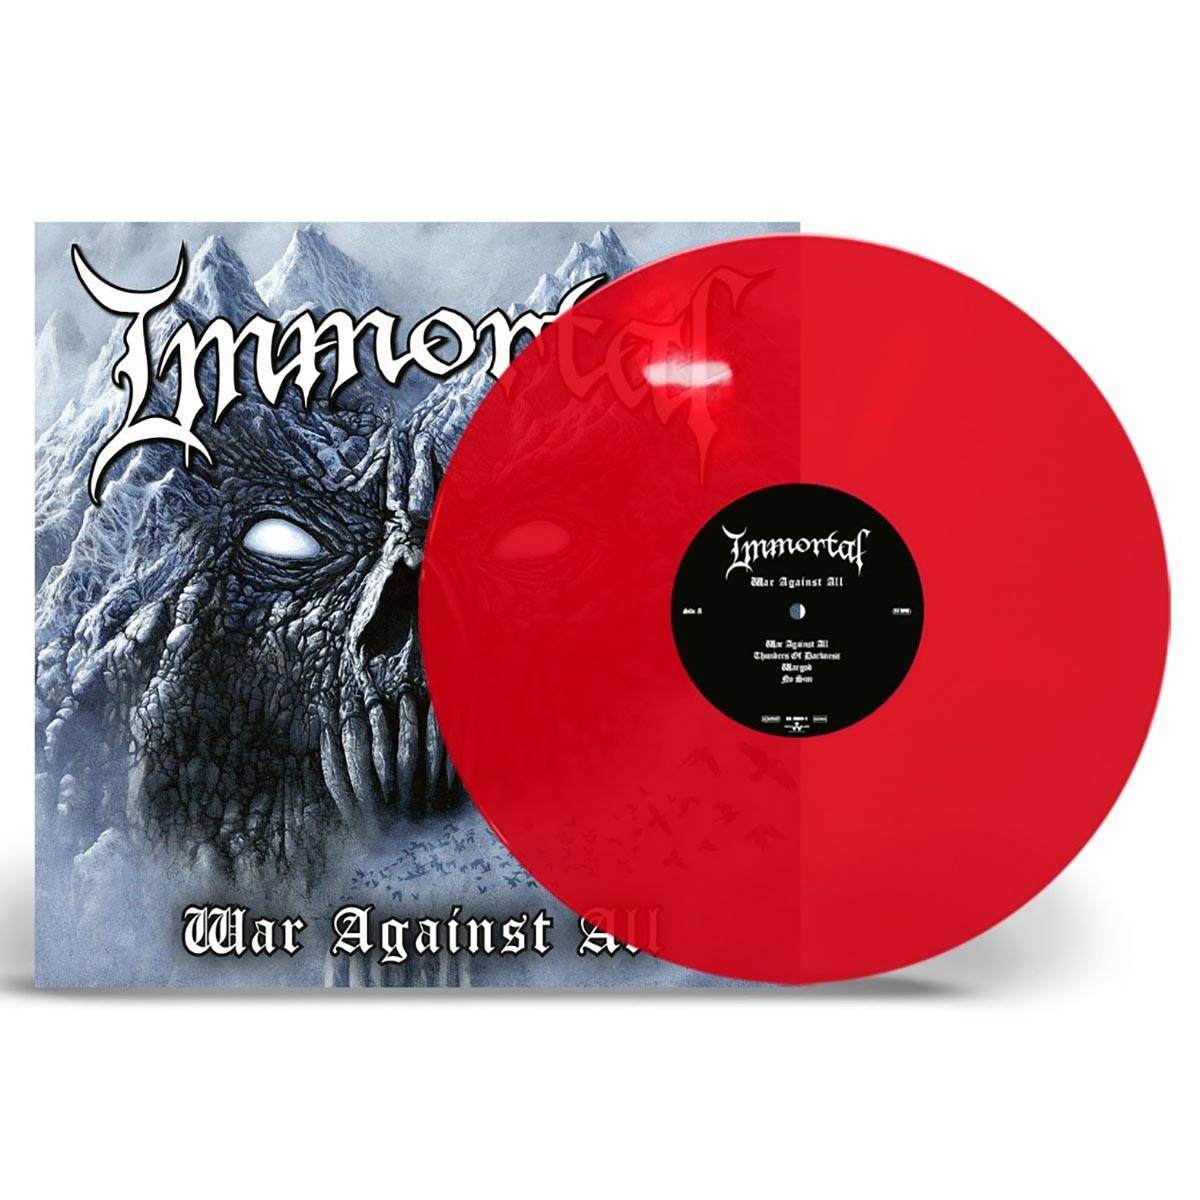 IMMORTAL - War Against All LP (NORDIC RED)